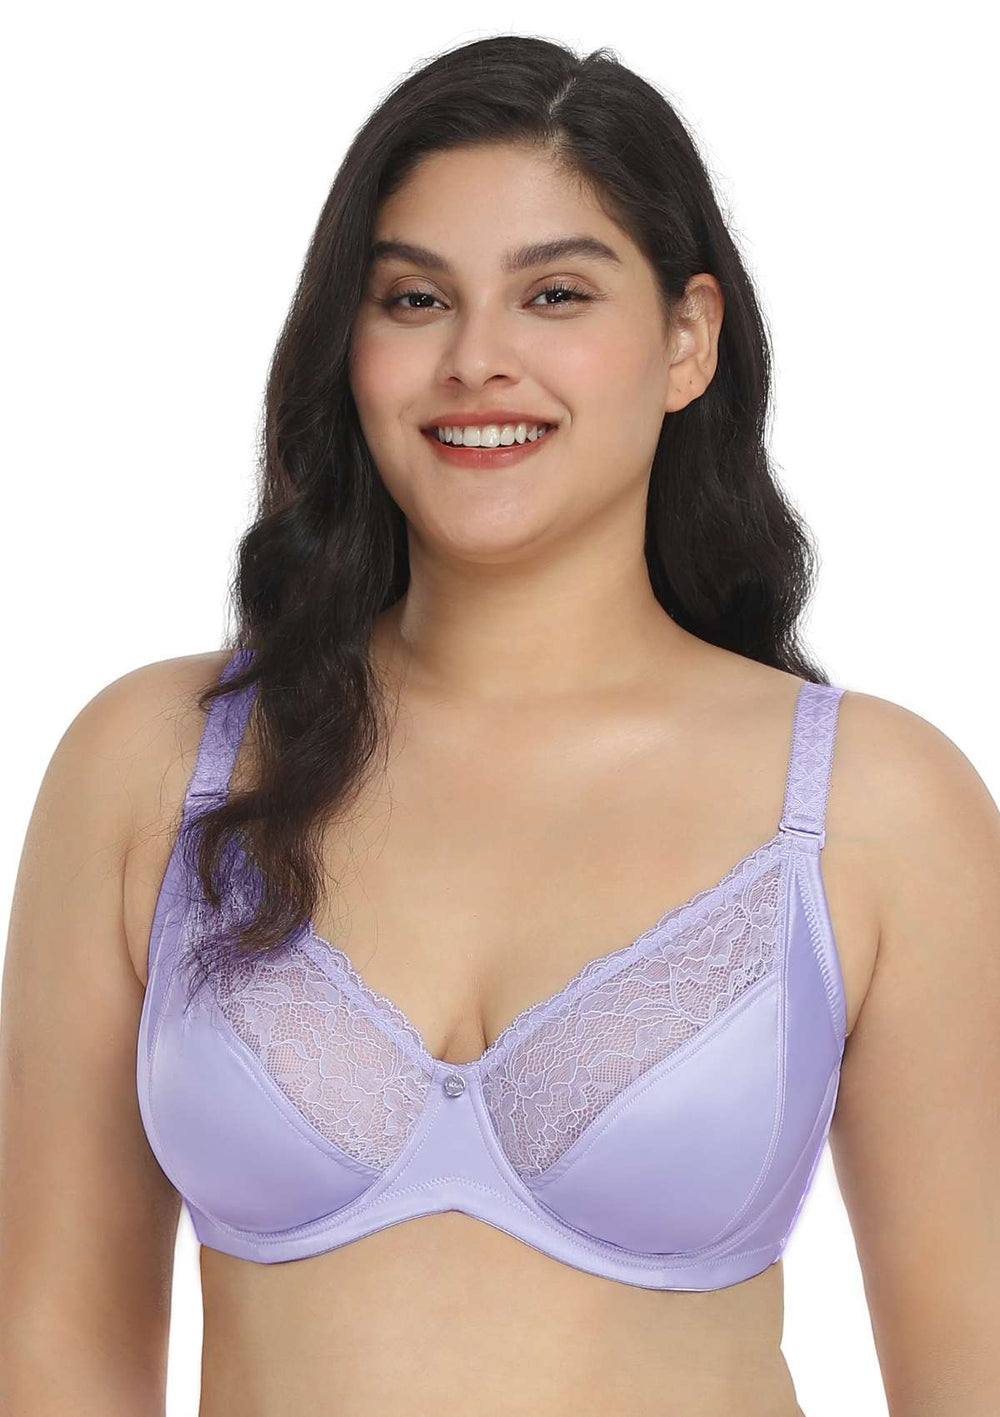 Women's Lace and Satin Underwire Bralette